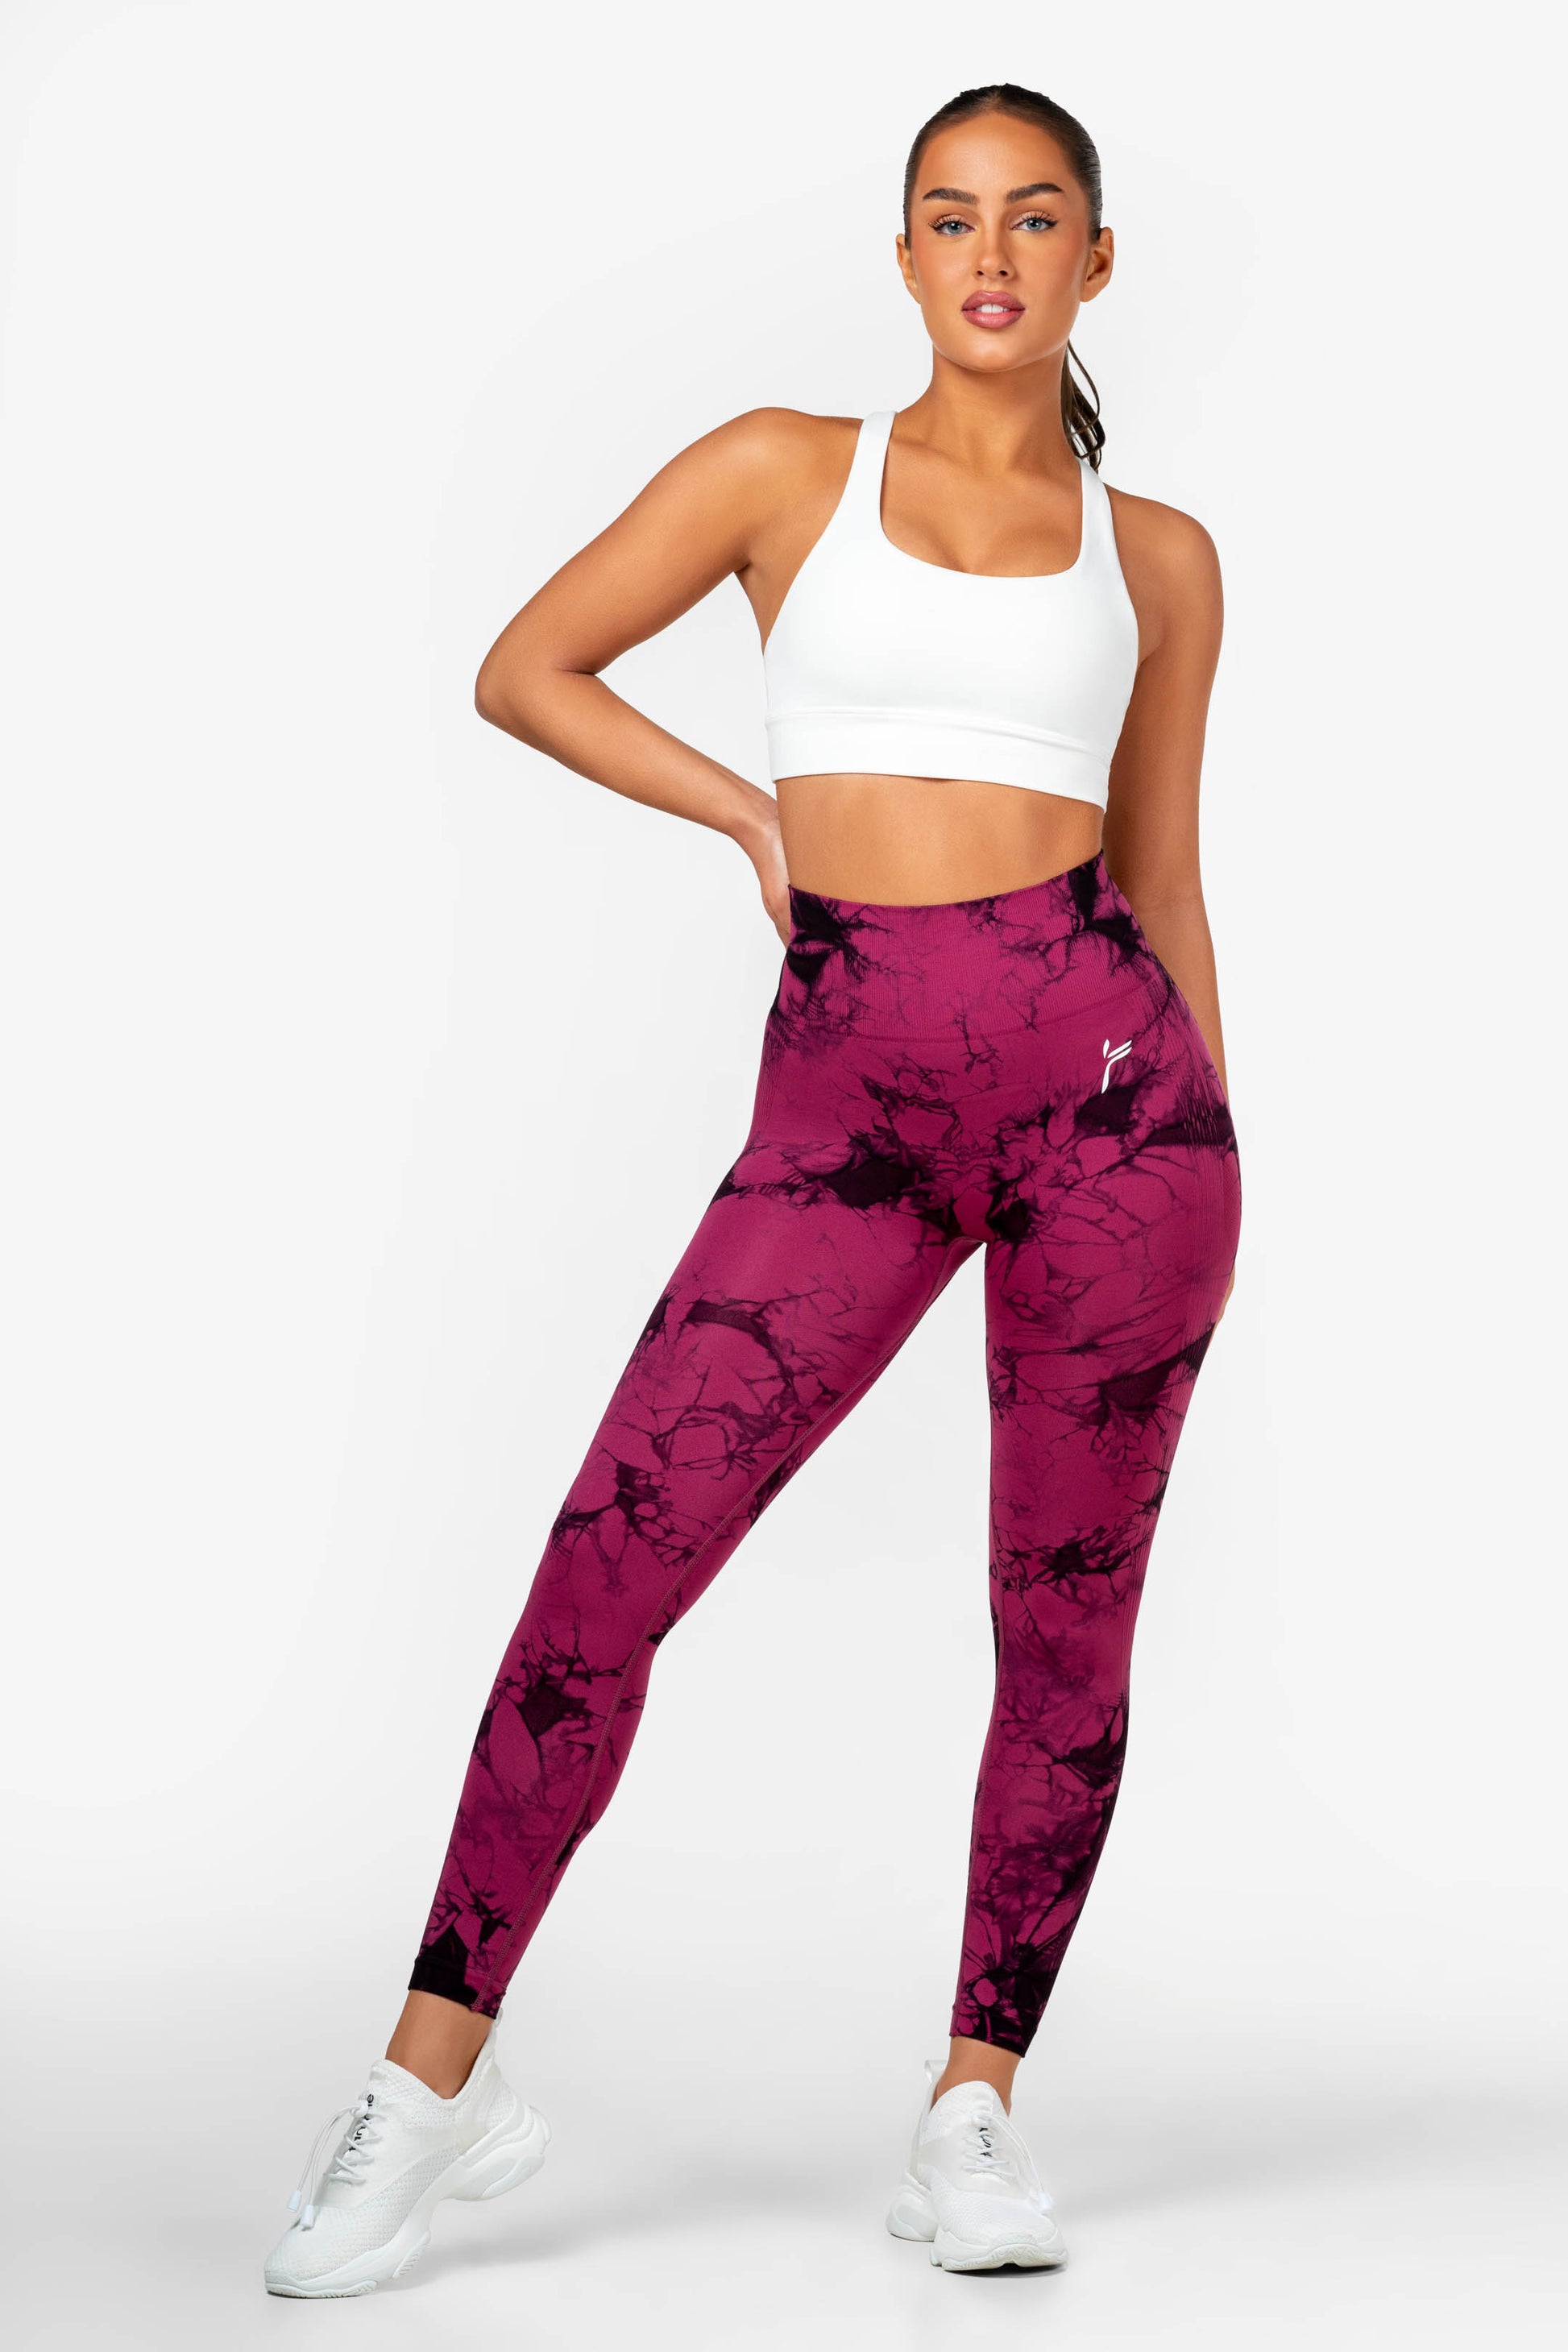 Denim Leggings with Ripped Tie Dye Look Pink and Black Color - Its All  Leggings